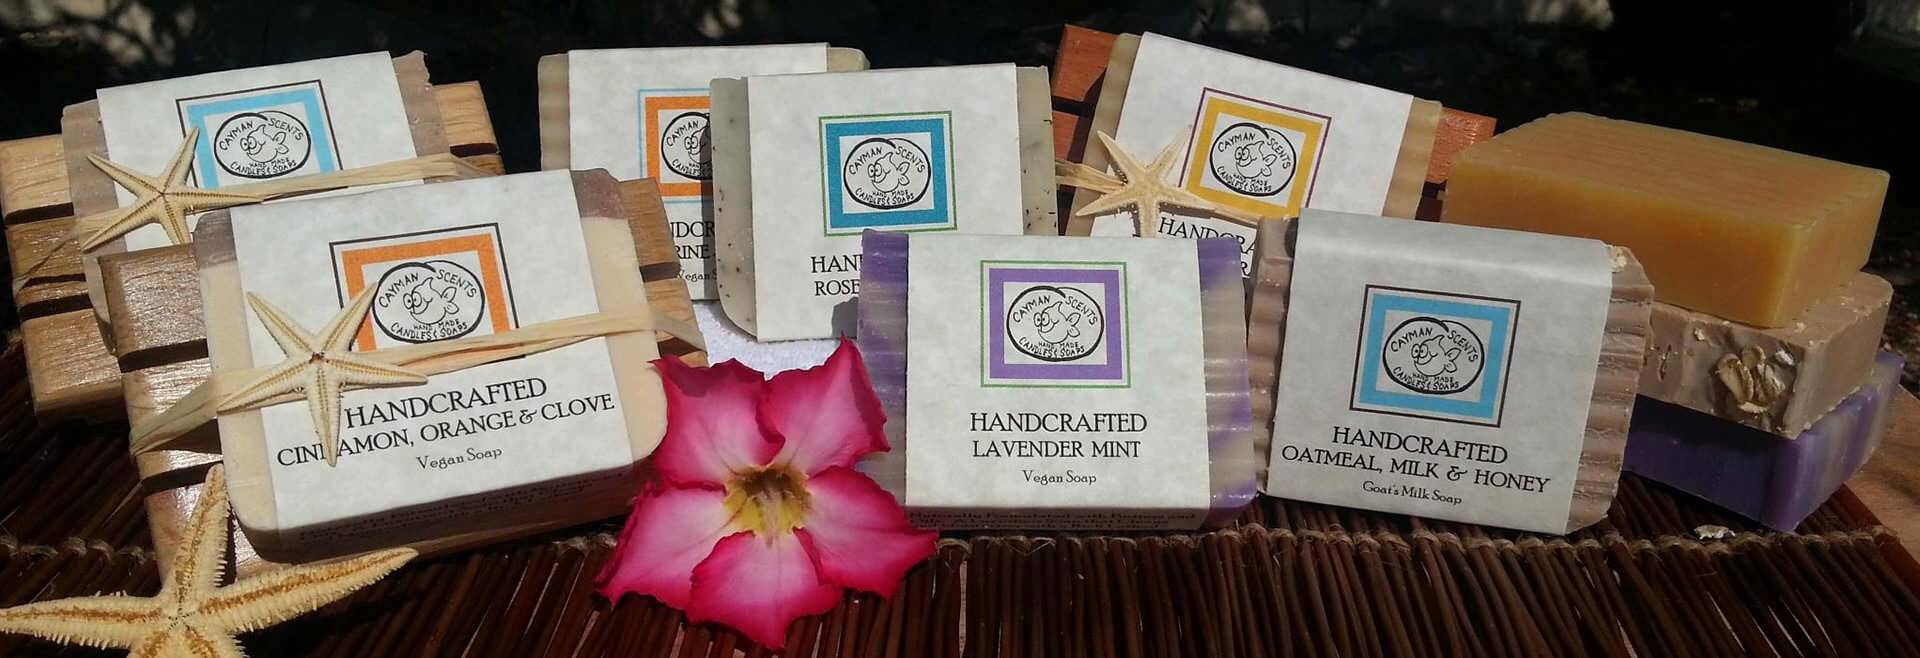 The Best Handcrafted Candles & Soap in the Cayman Islands